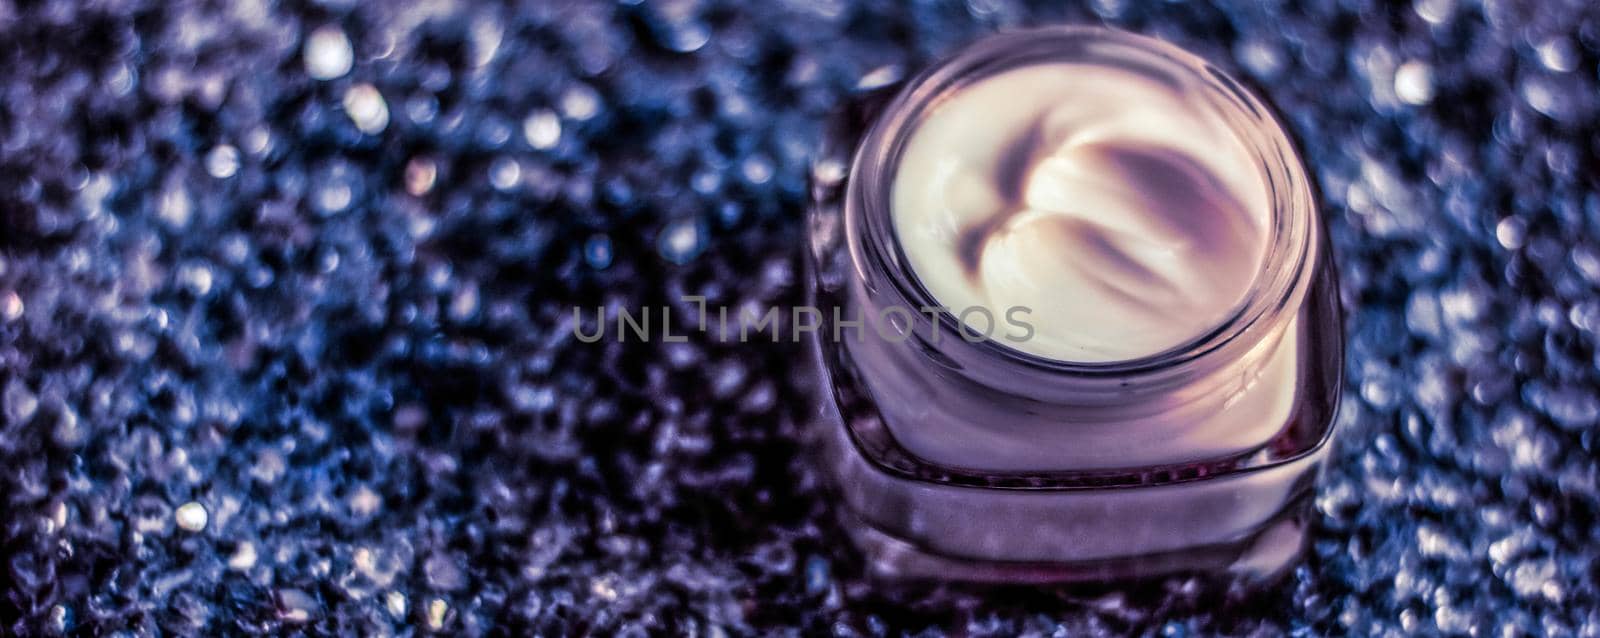 Luxury face cream for healthy skin on shiny glitter background, moisturizing spa cosmetics and natural skincare beauty brand product by Anneleven